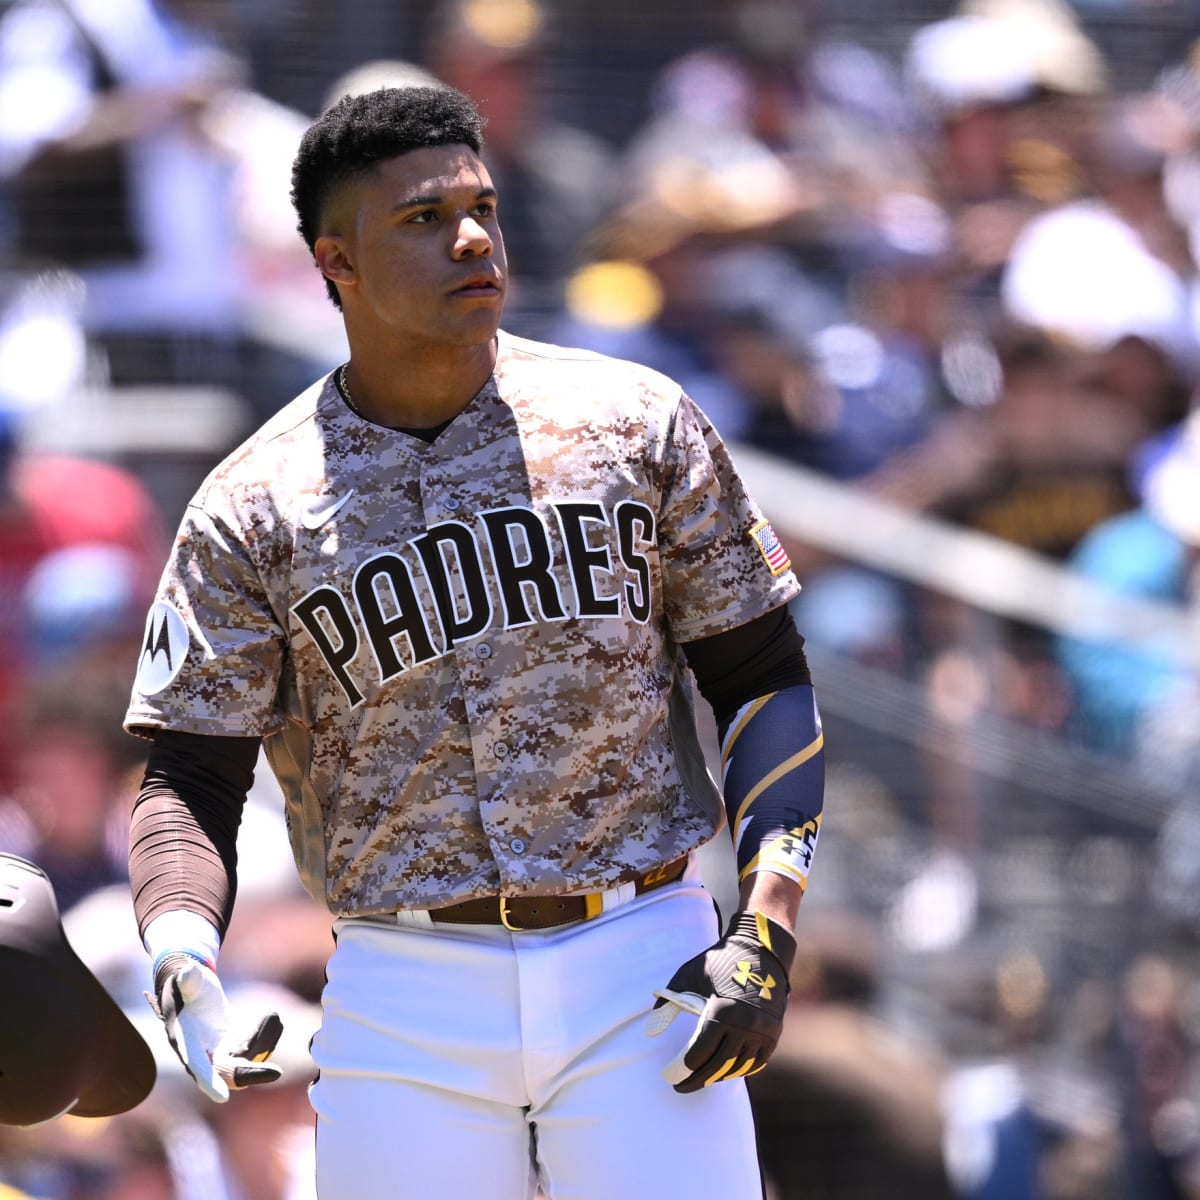 Padres news: Why has Juan Soto struggled in San Diego? - Gaslamp Ball